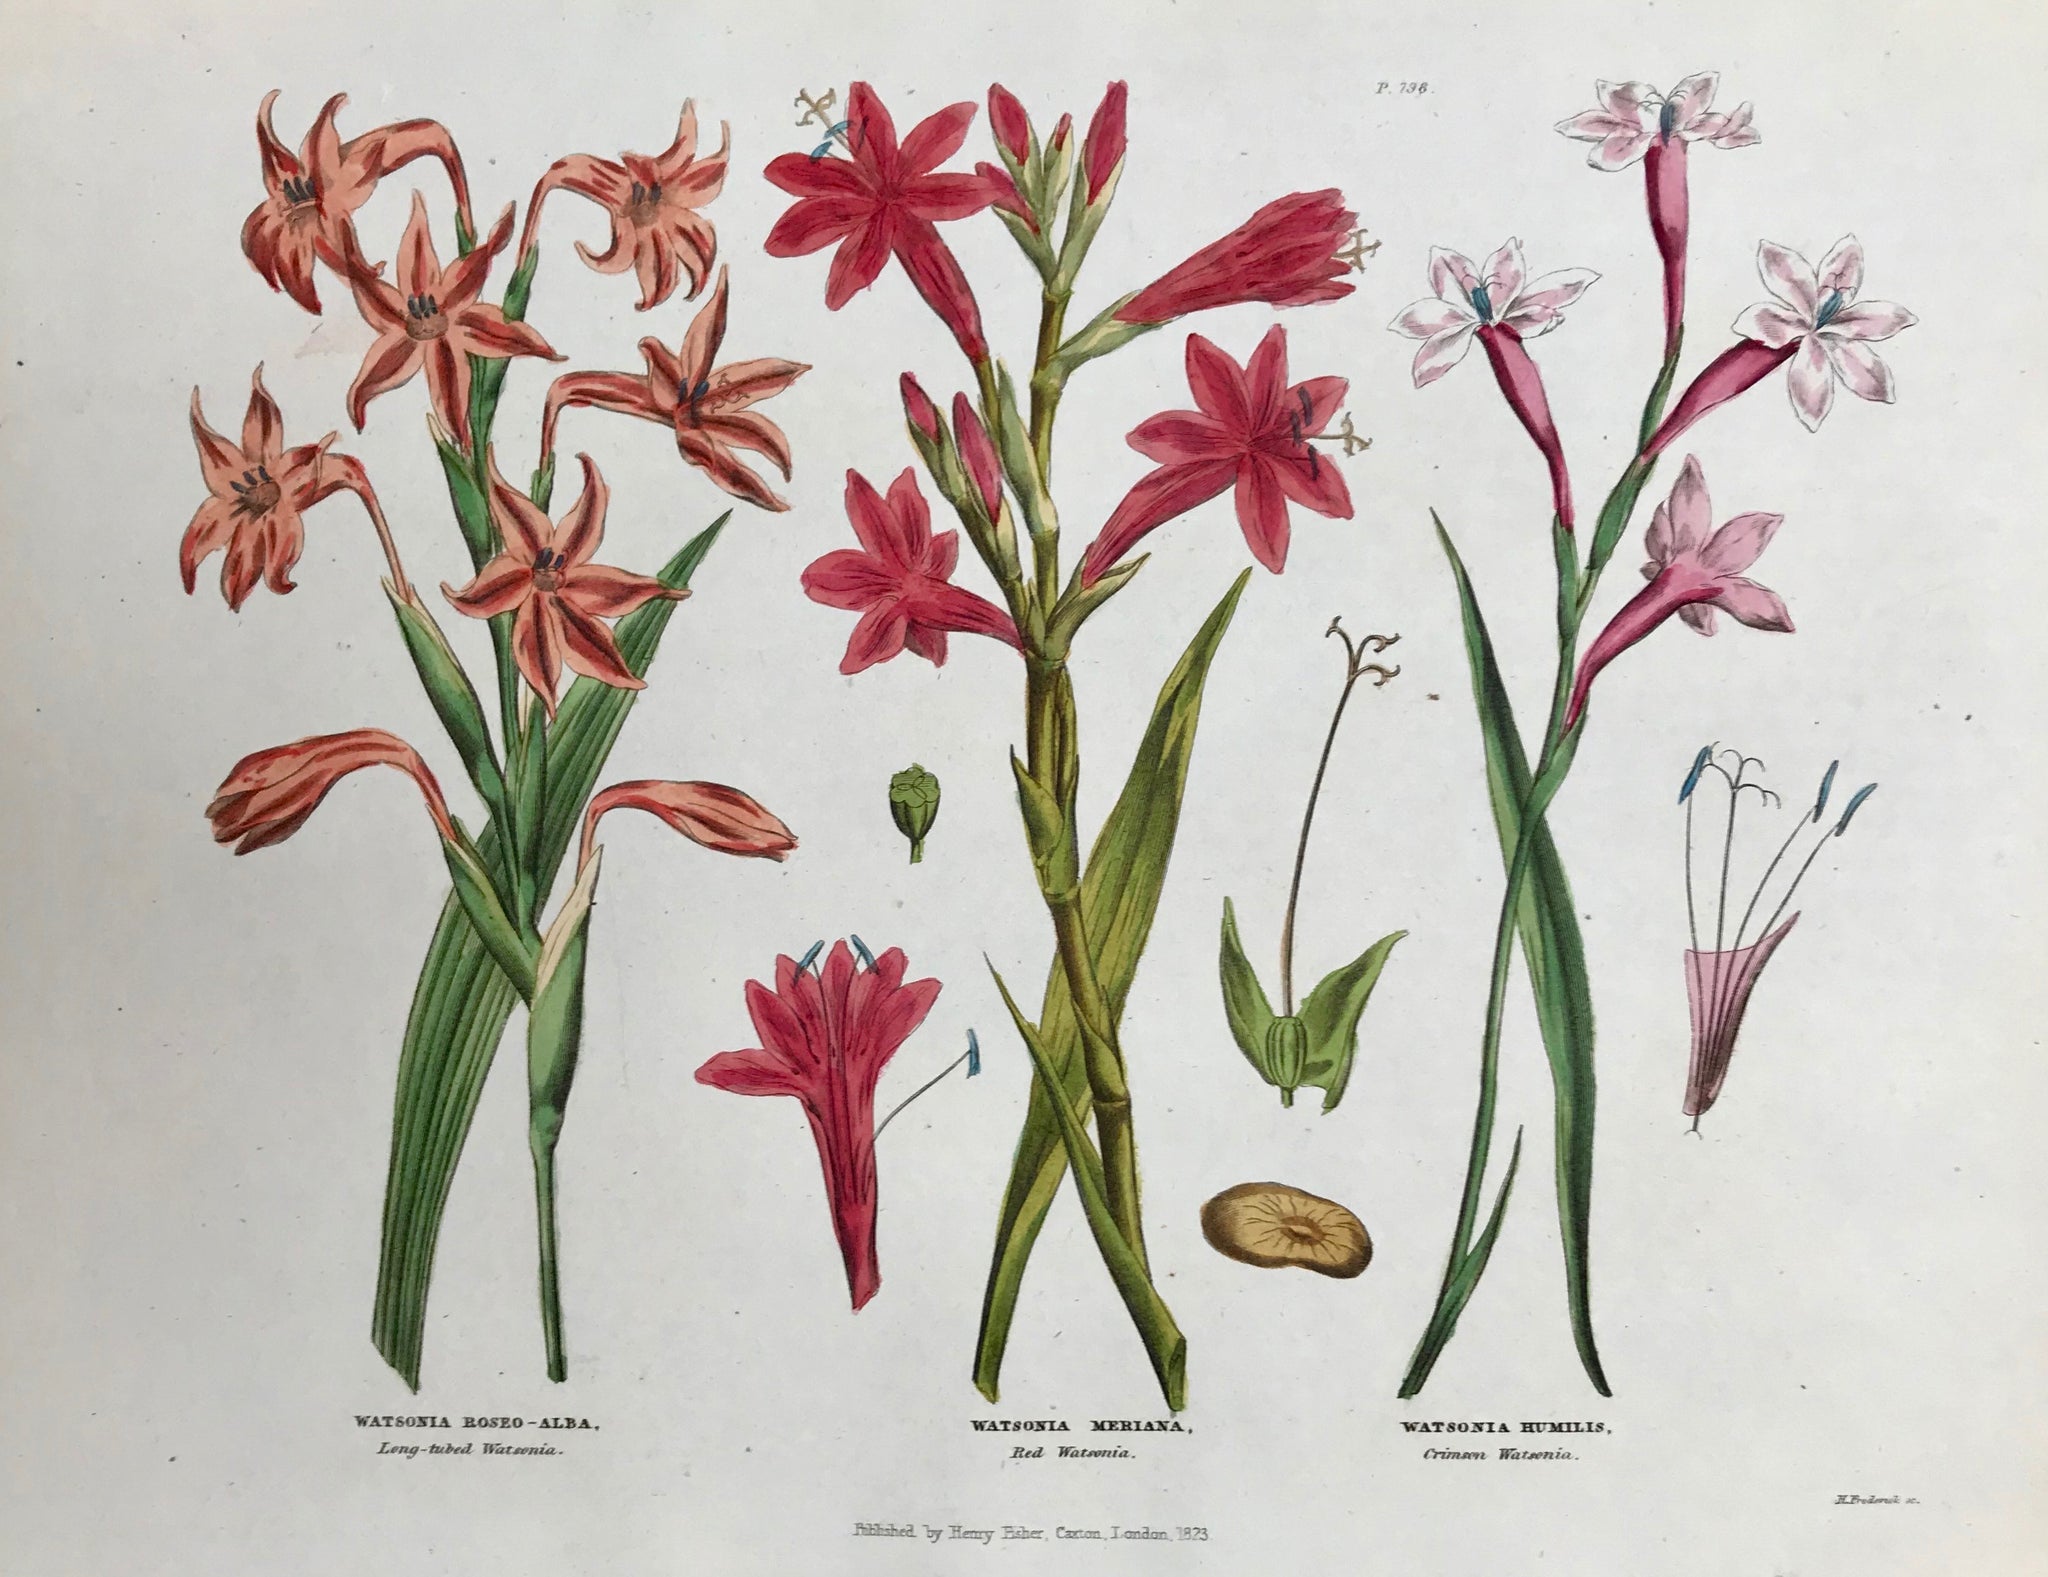  Botanicals:  Watsonia Roseo-Alba, Long-tubed Watsonia, Watsonia Meriana Red Watsonia, Watsonia Humilis Crimson Watsonia.  Browning in upper margin corners.  Antique Botanical Prints from "The Universal Herbal" by Thomas Green.  The complete title of this accurately and absolutely delightfully hand-colored work is: "The Universal Herbal", or Botanical, Medical, and Agricultural Dictionary, containing an Account of all the known Plants in the World